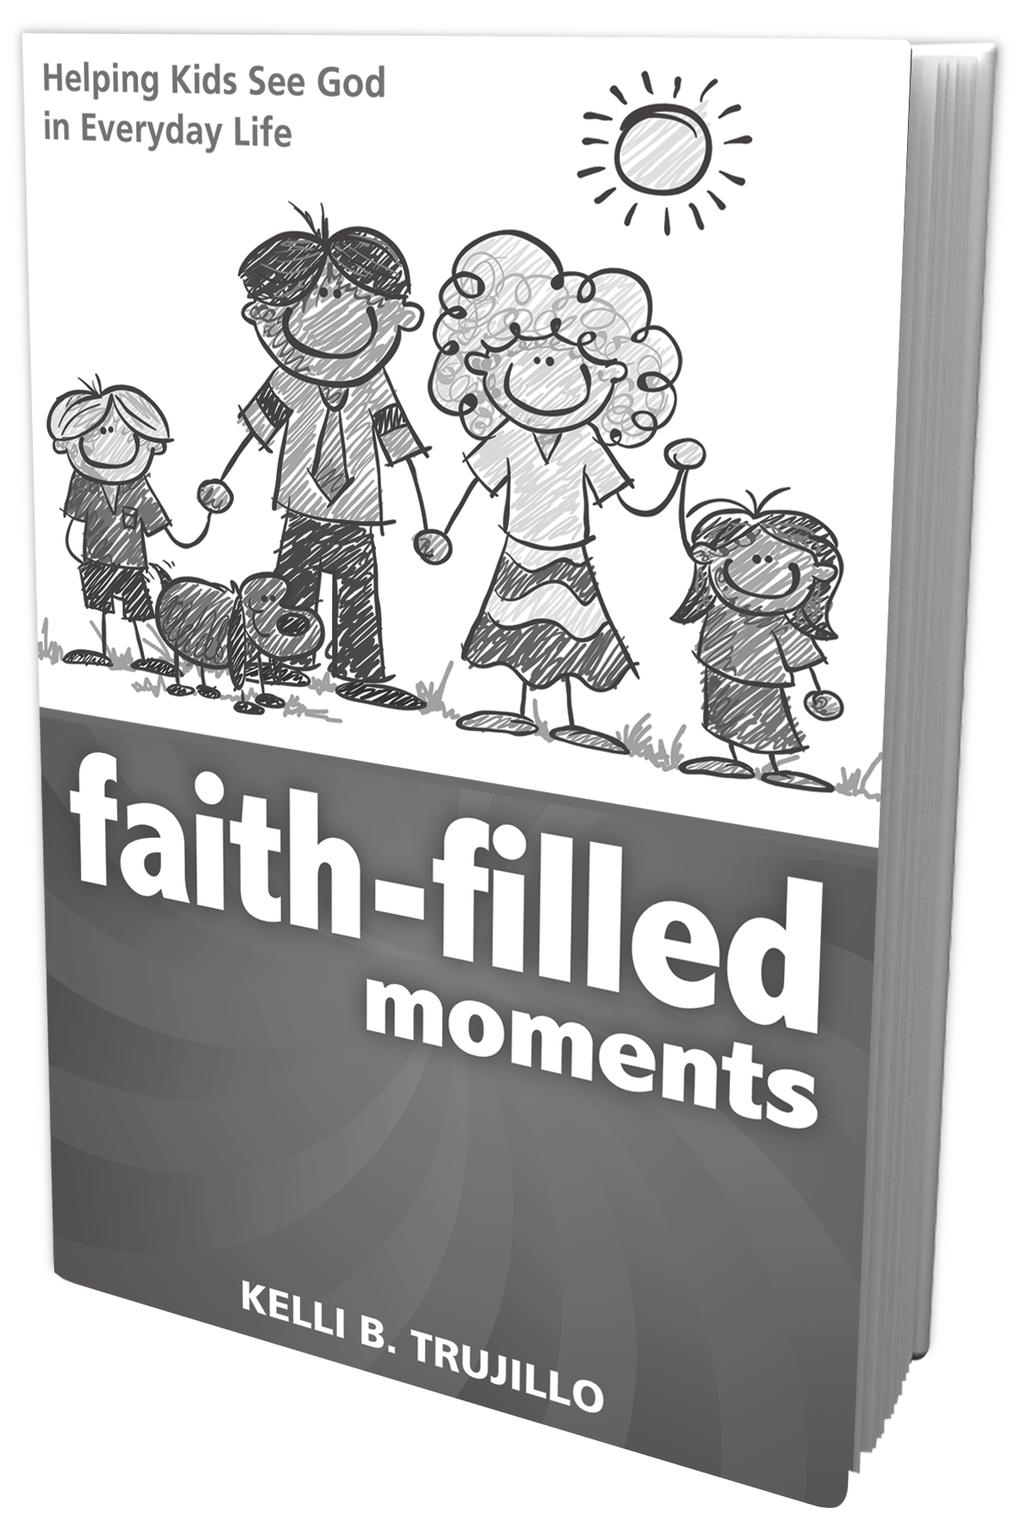 Make every moment with your child an opportunity for growing faith!